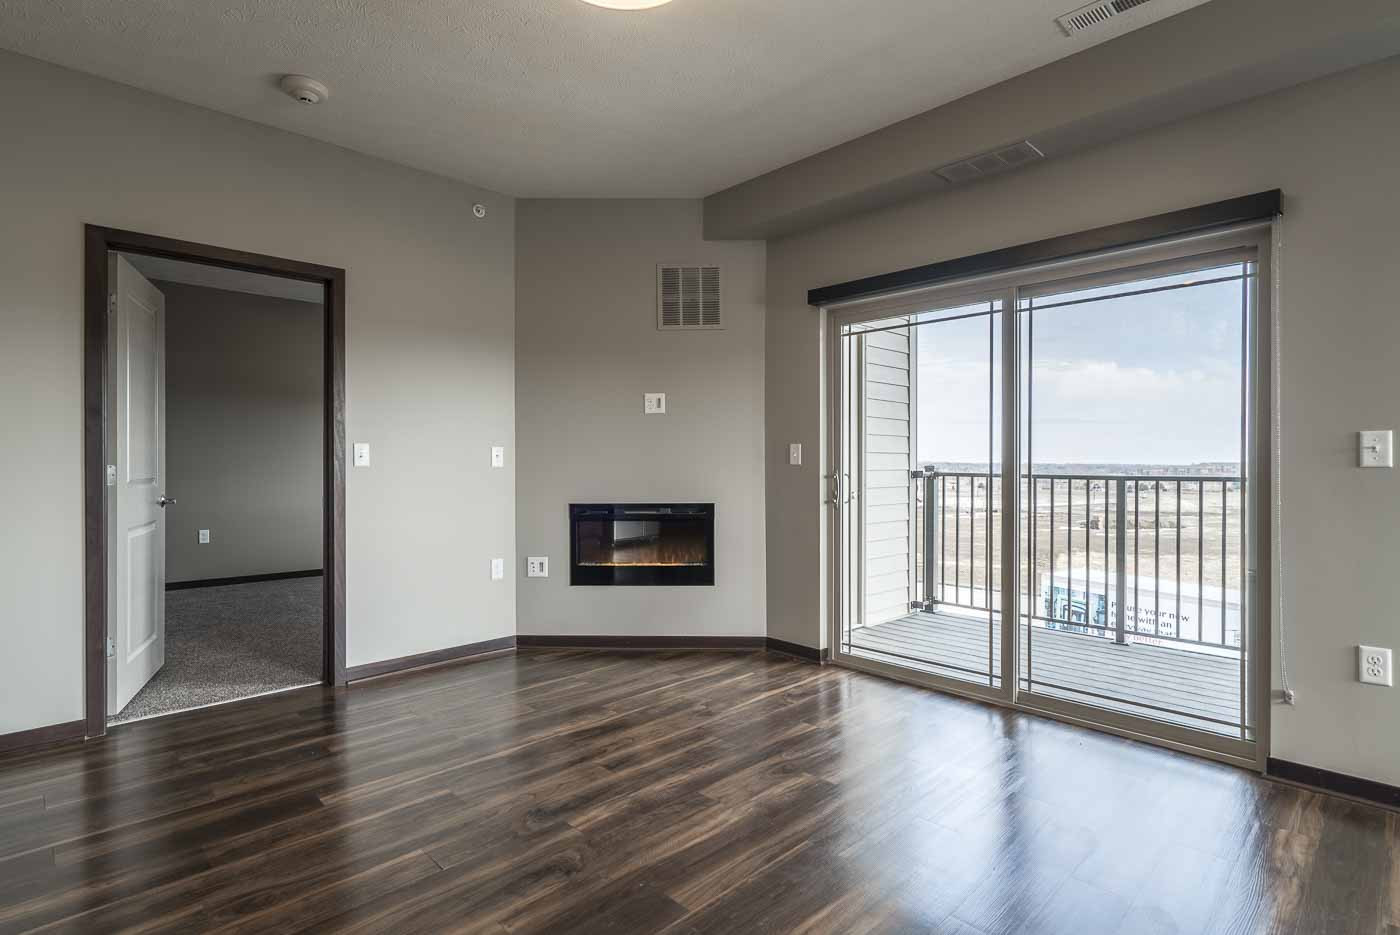 15 Cute Hardwood Floor Refinishing Des Moines 2024 free download hardwood floor refinishing des moines of studio one two three bedroom apartments rent 360 at jordan west with picasso c3 floor plan 360 at jordan west new luxury apartments in des moines